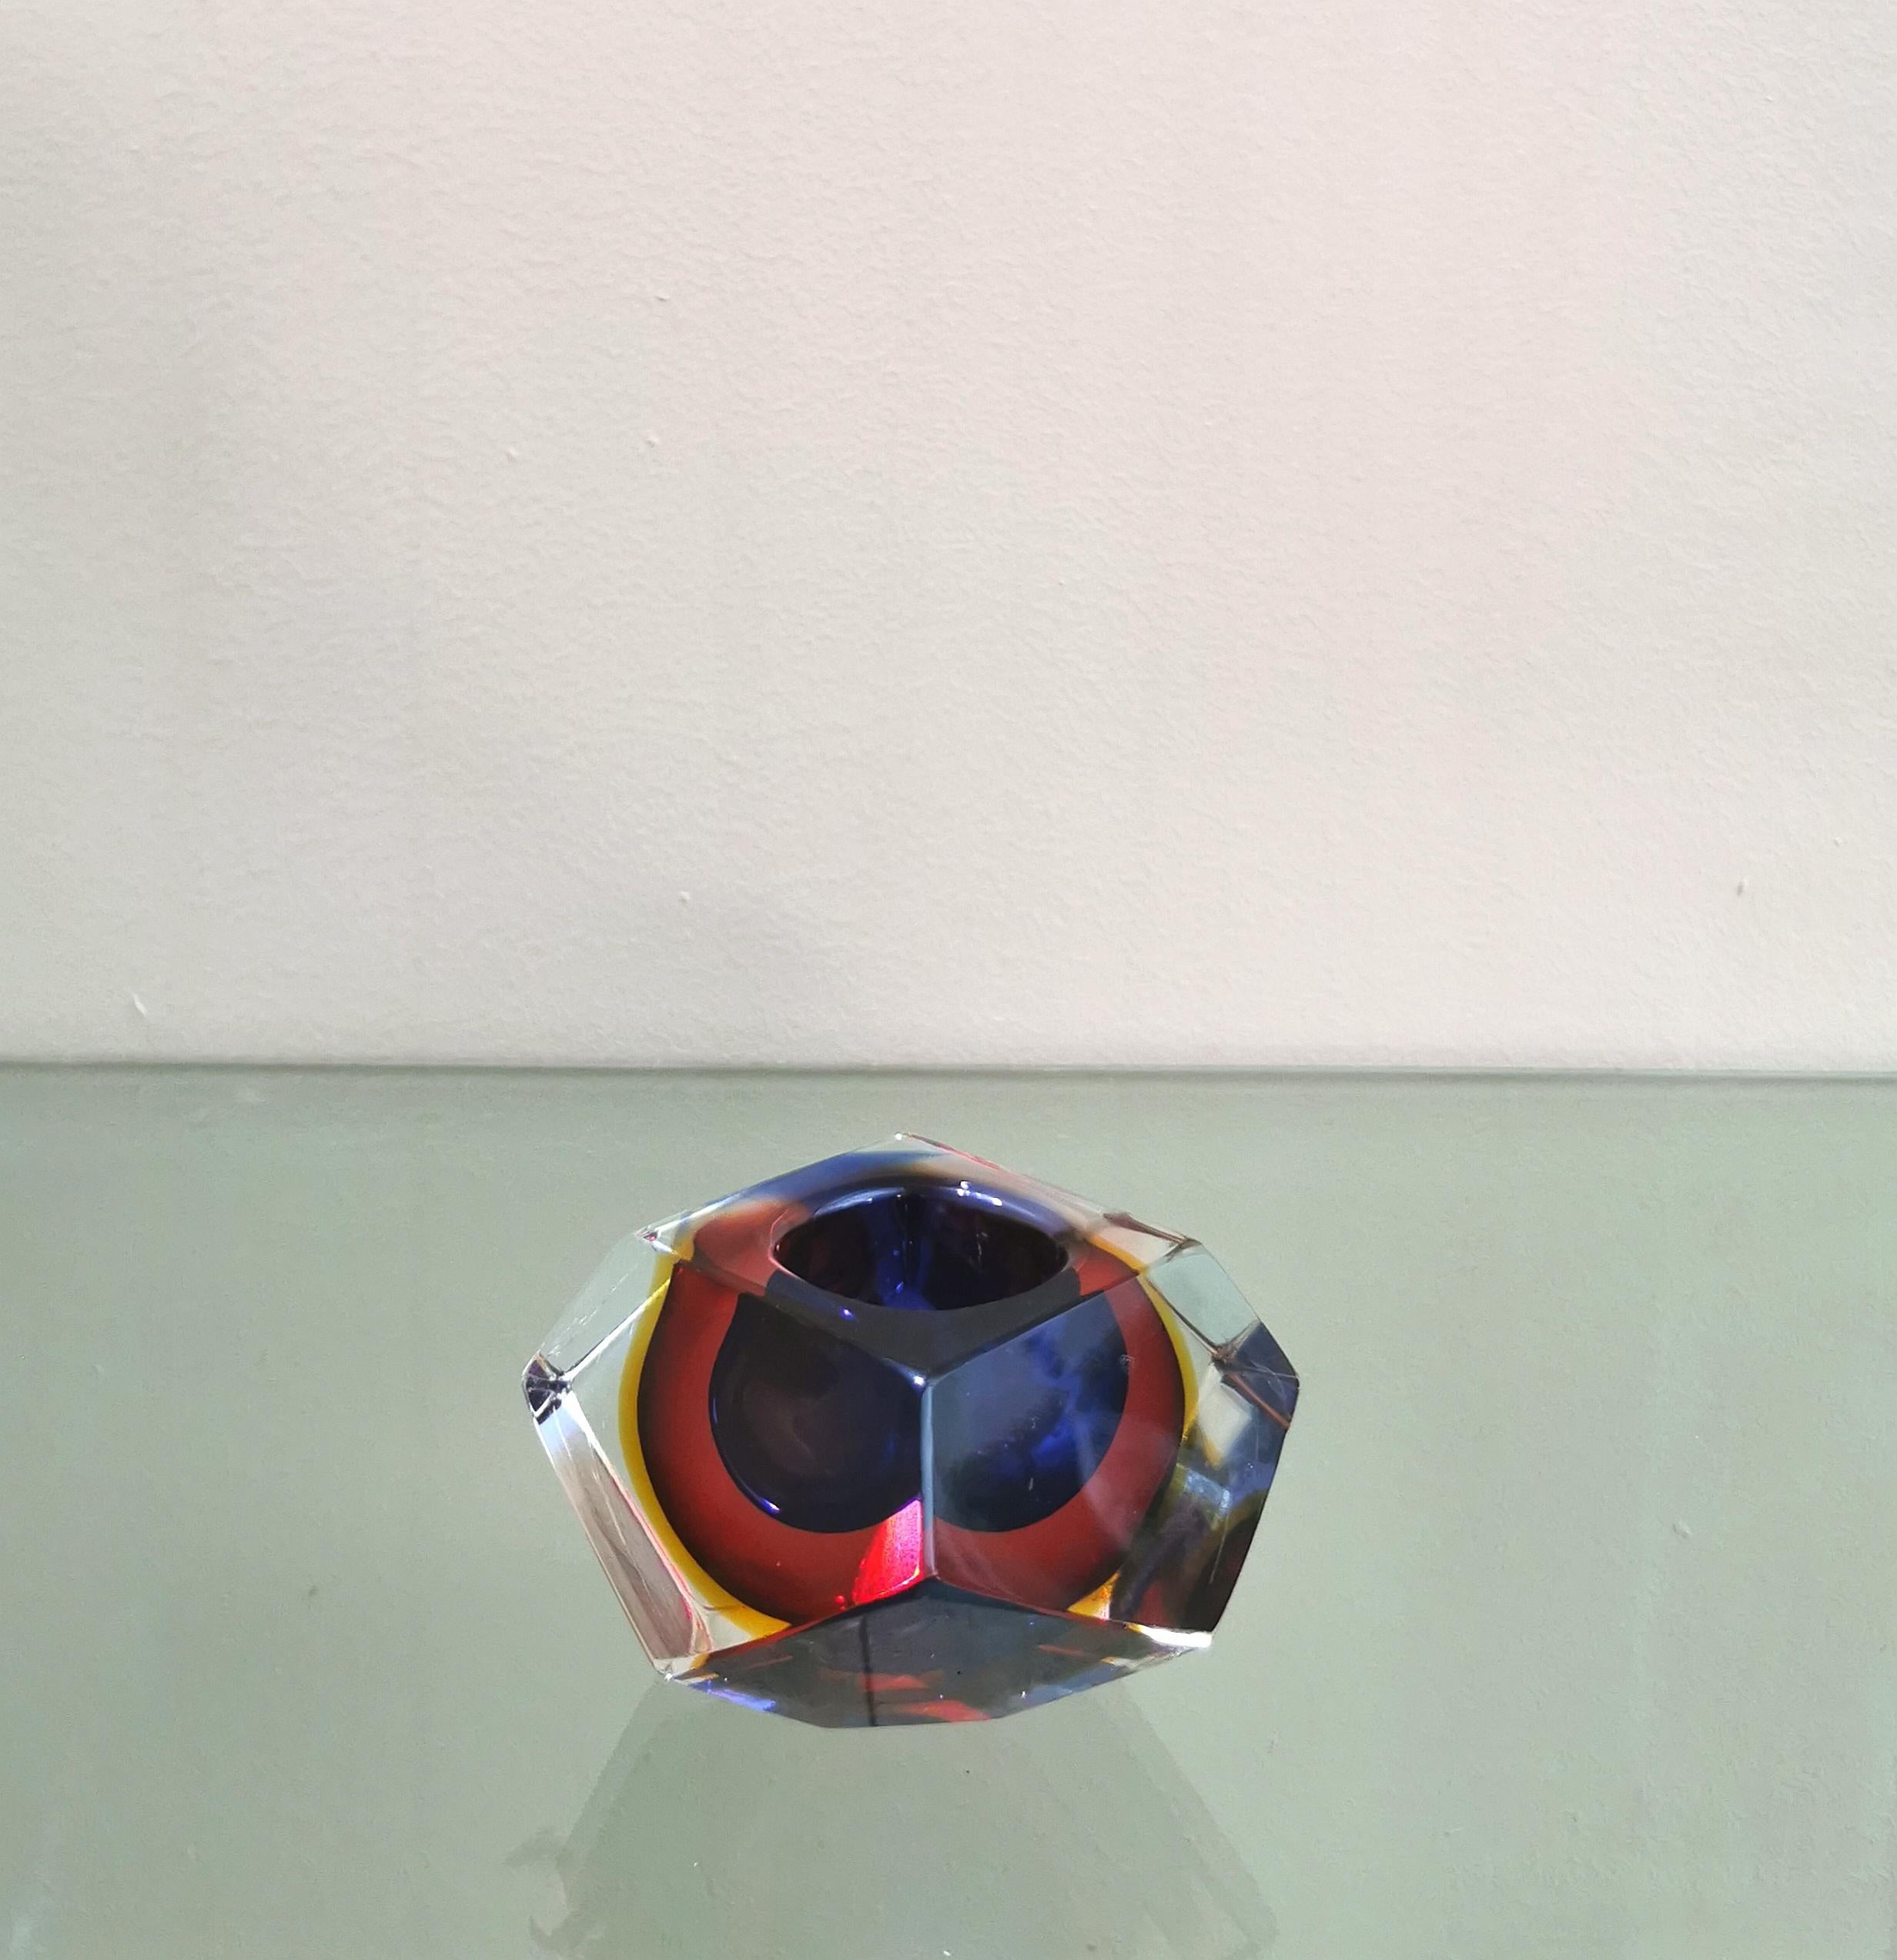 Candle holder / ashtray designed by the Italian designer Flavio Poli, produced in the 70s. The candle holder was made of Murano glass with the particular sommerso technique, it has a particular shape of a diamond, with bright colors, such as